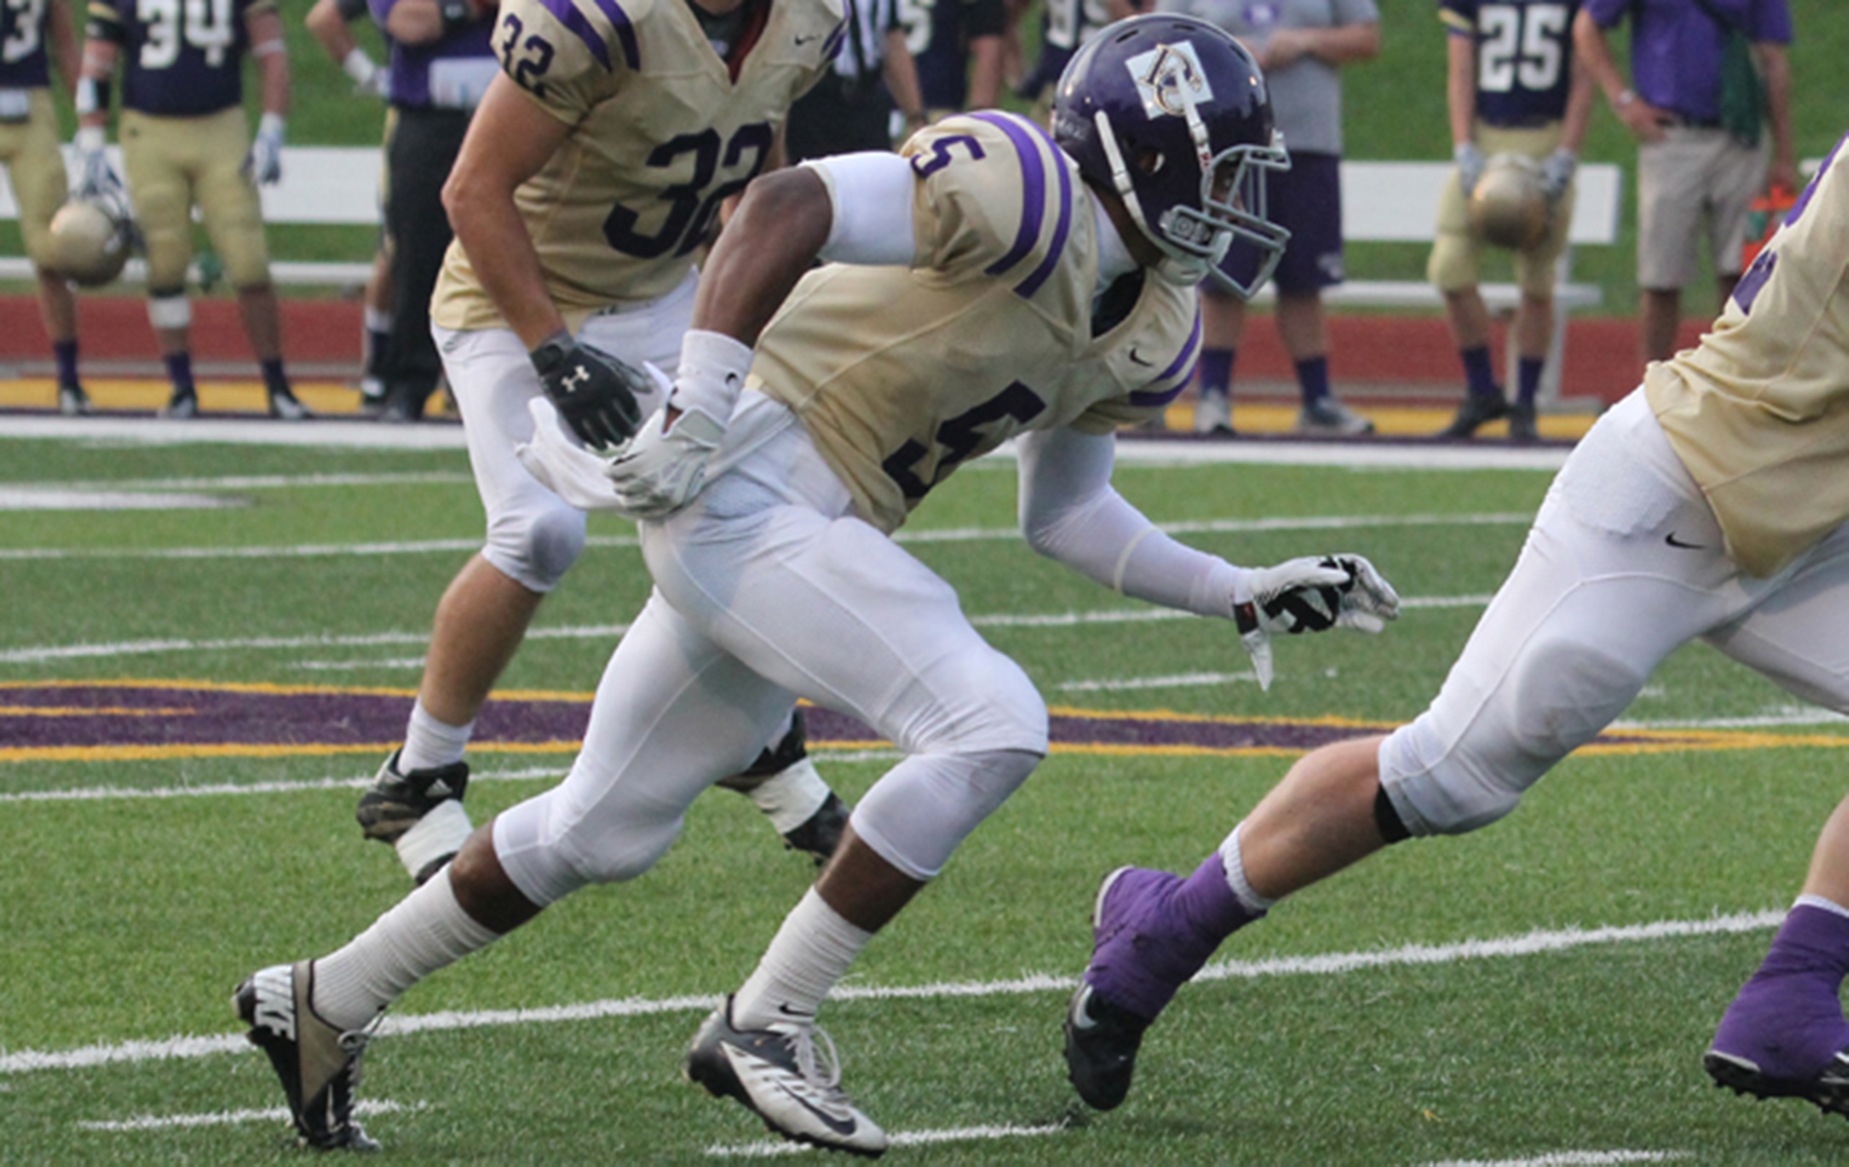 Matherson Named HCAC Highlight of the Week Recipient